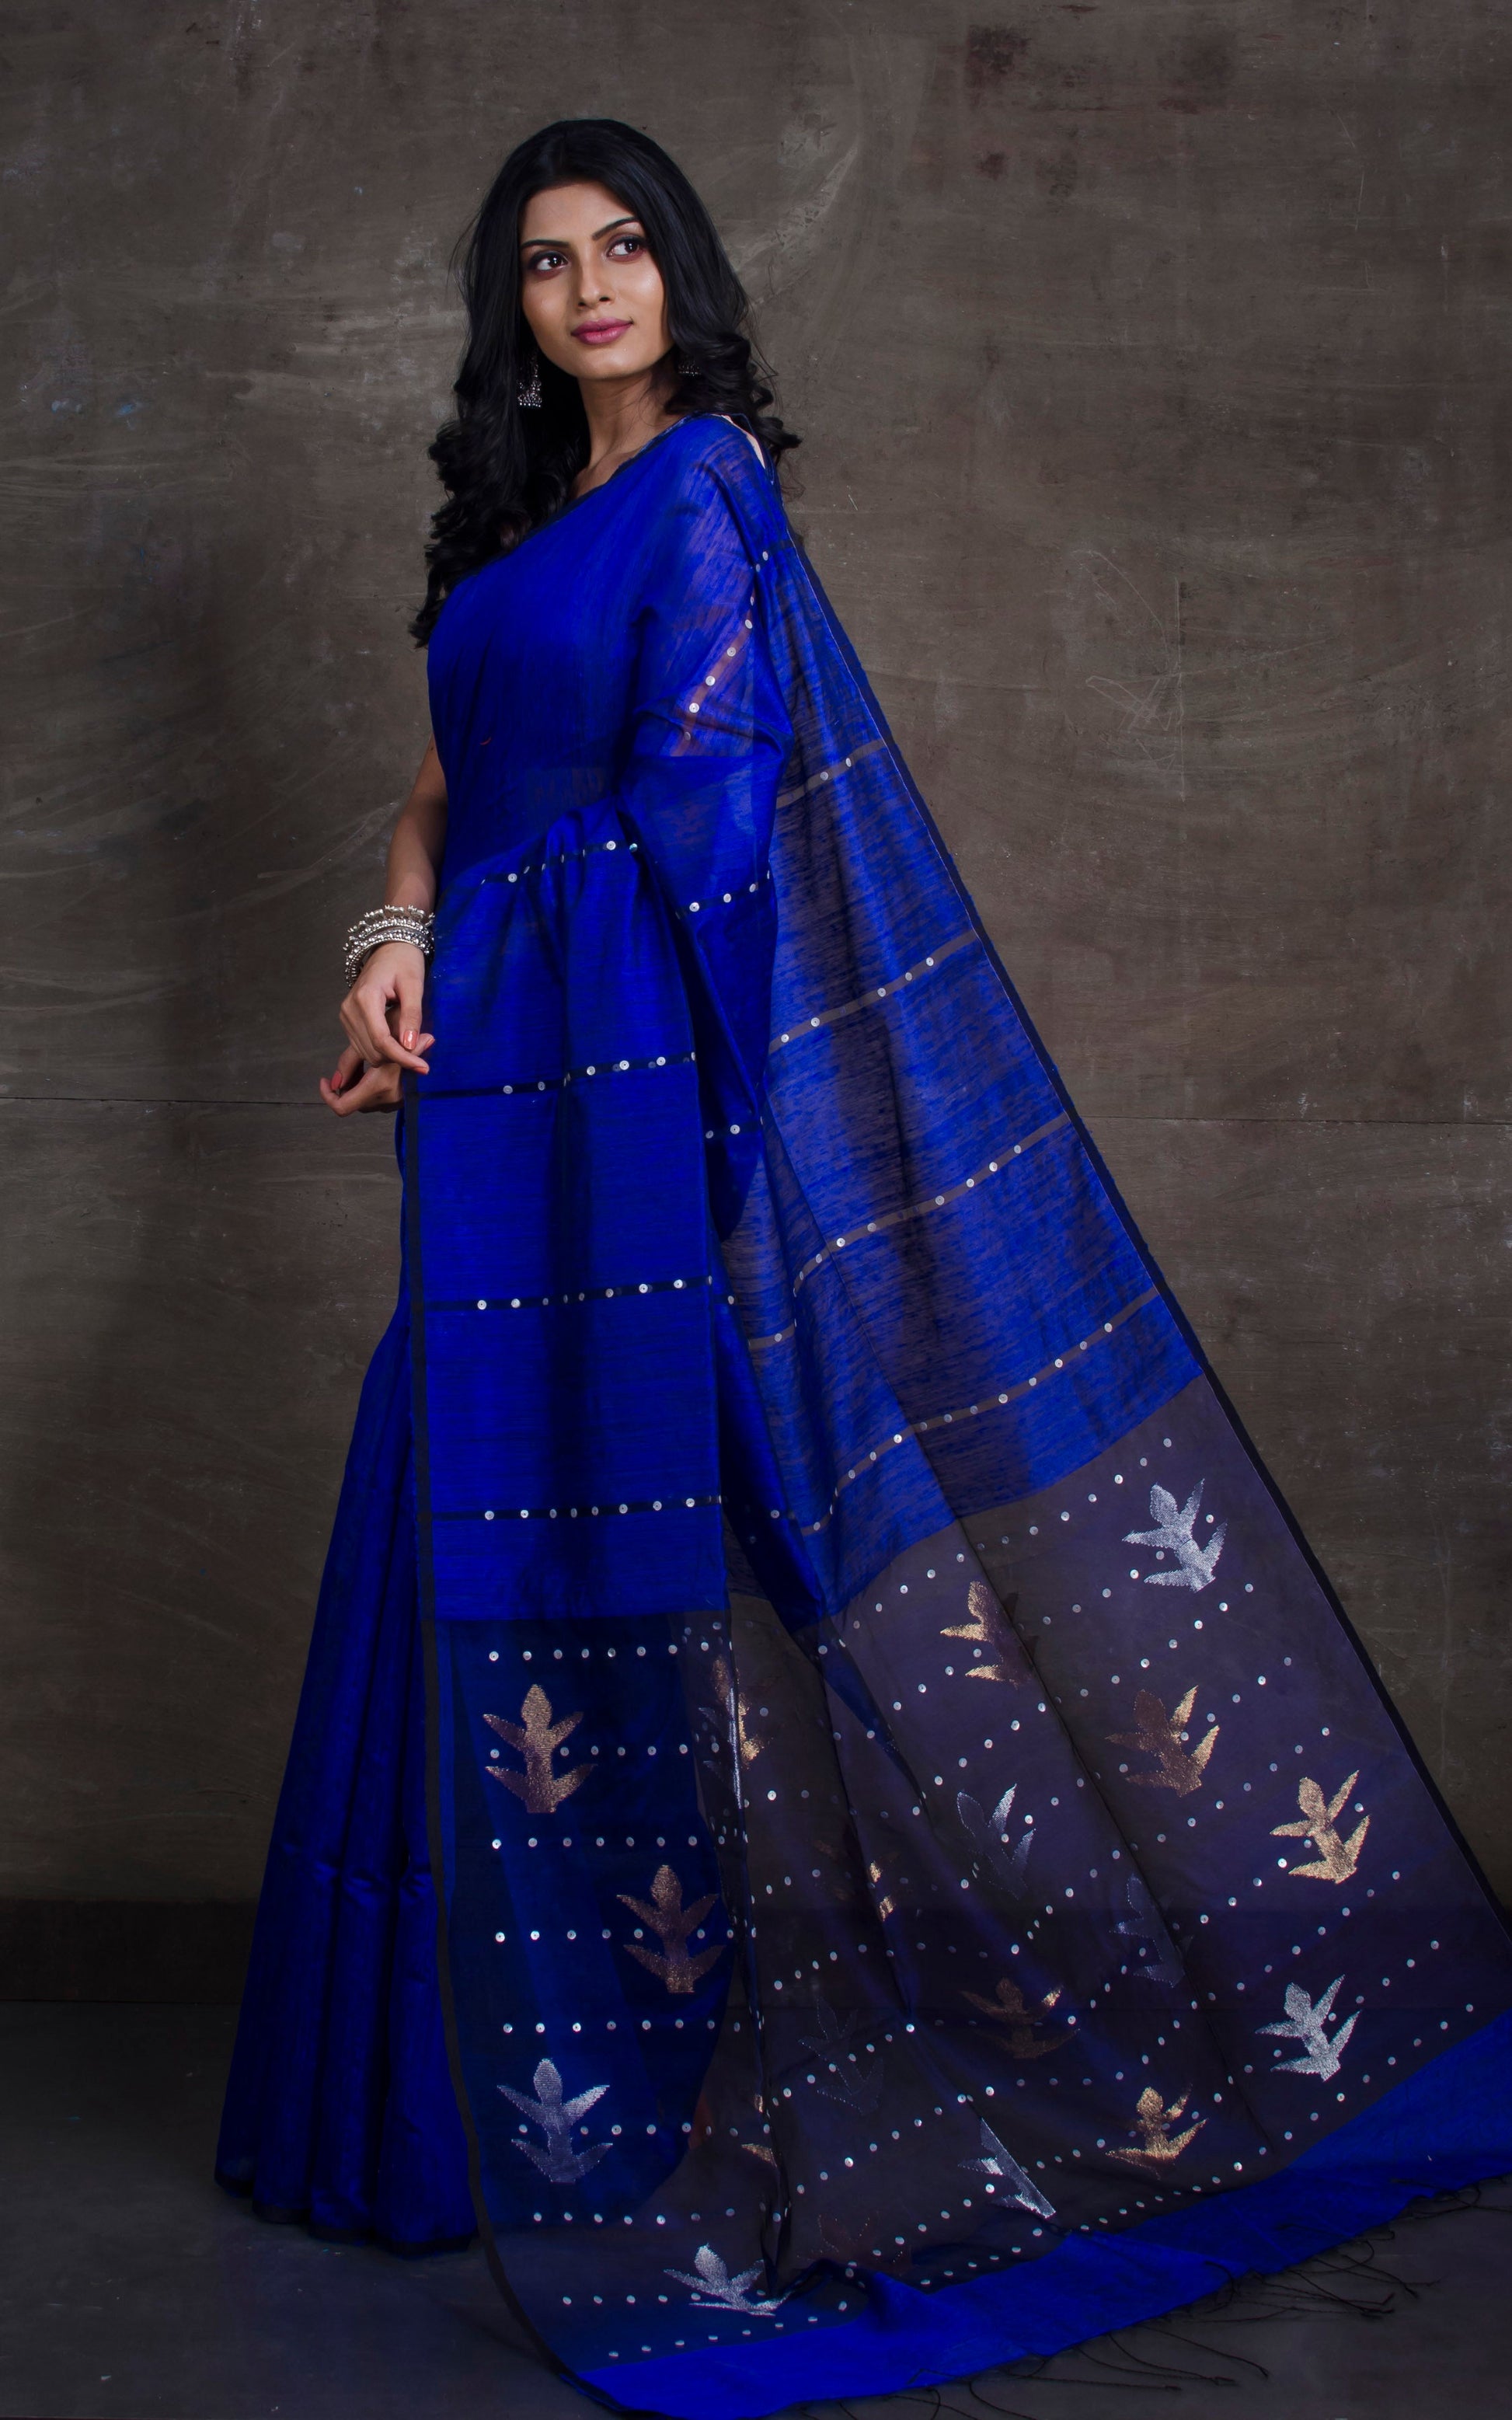 Woven Conch Shell Work Matka Tussar Silk Saree in Berry Blue and Black